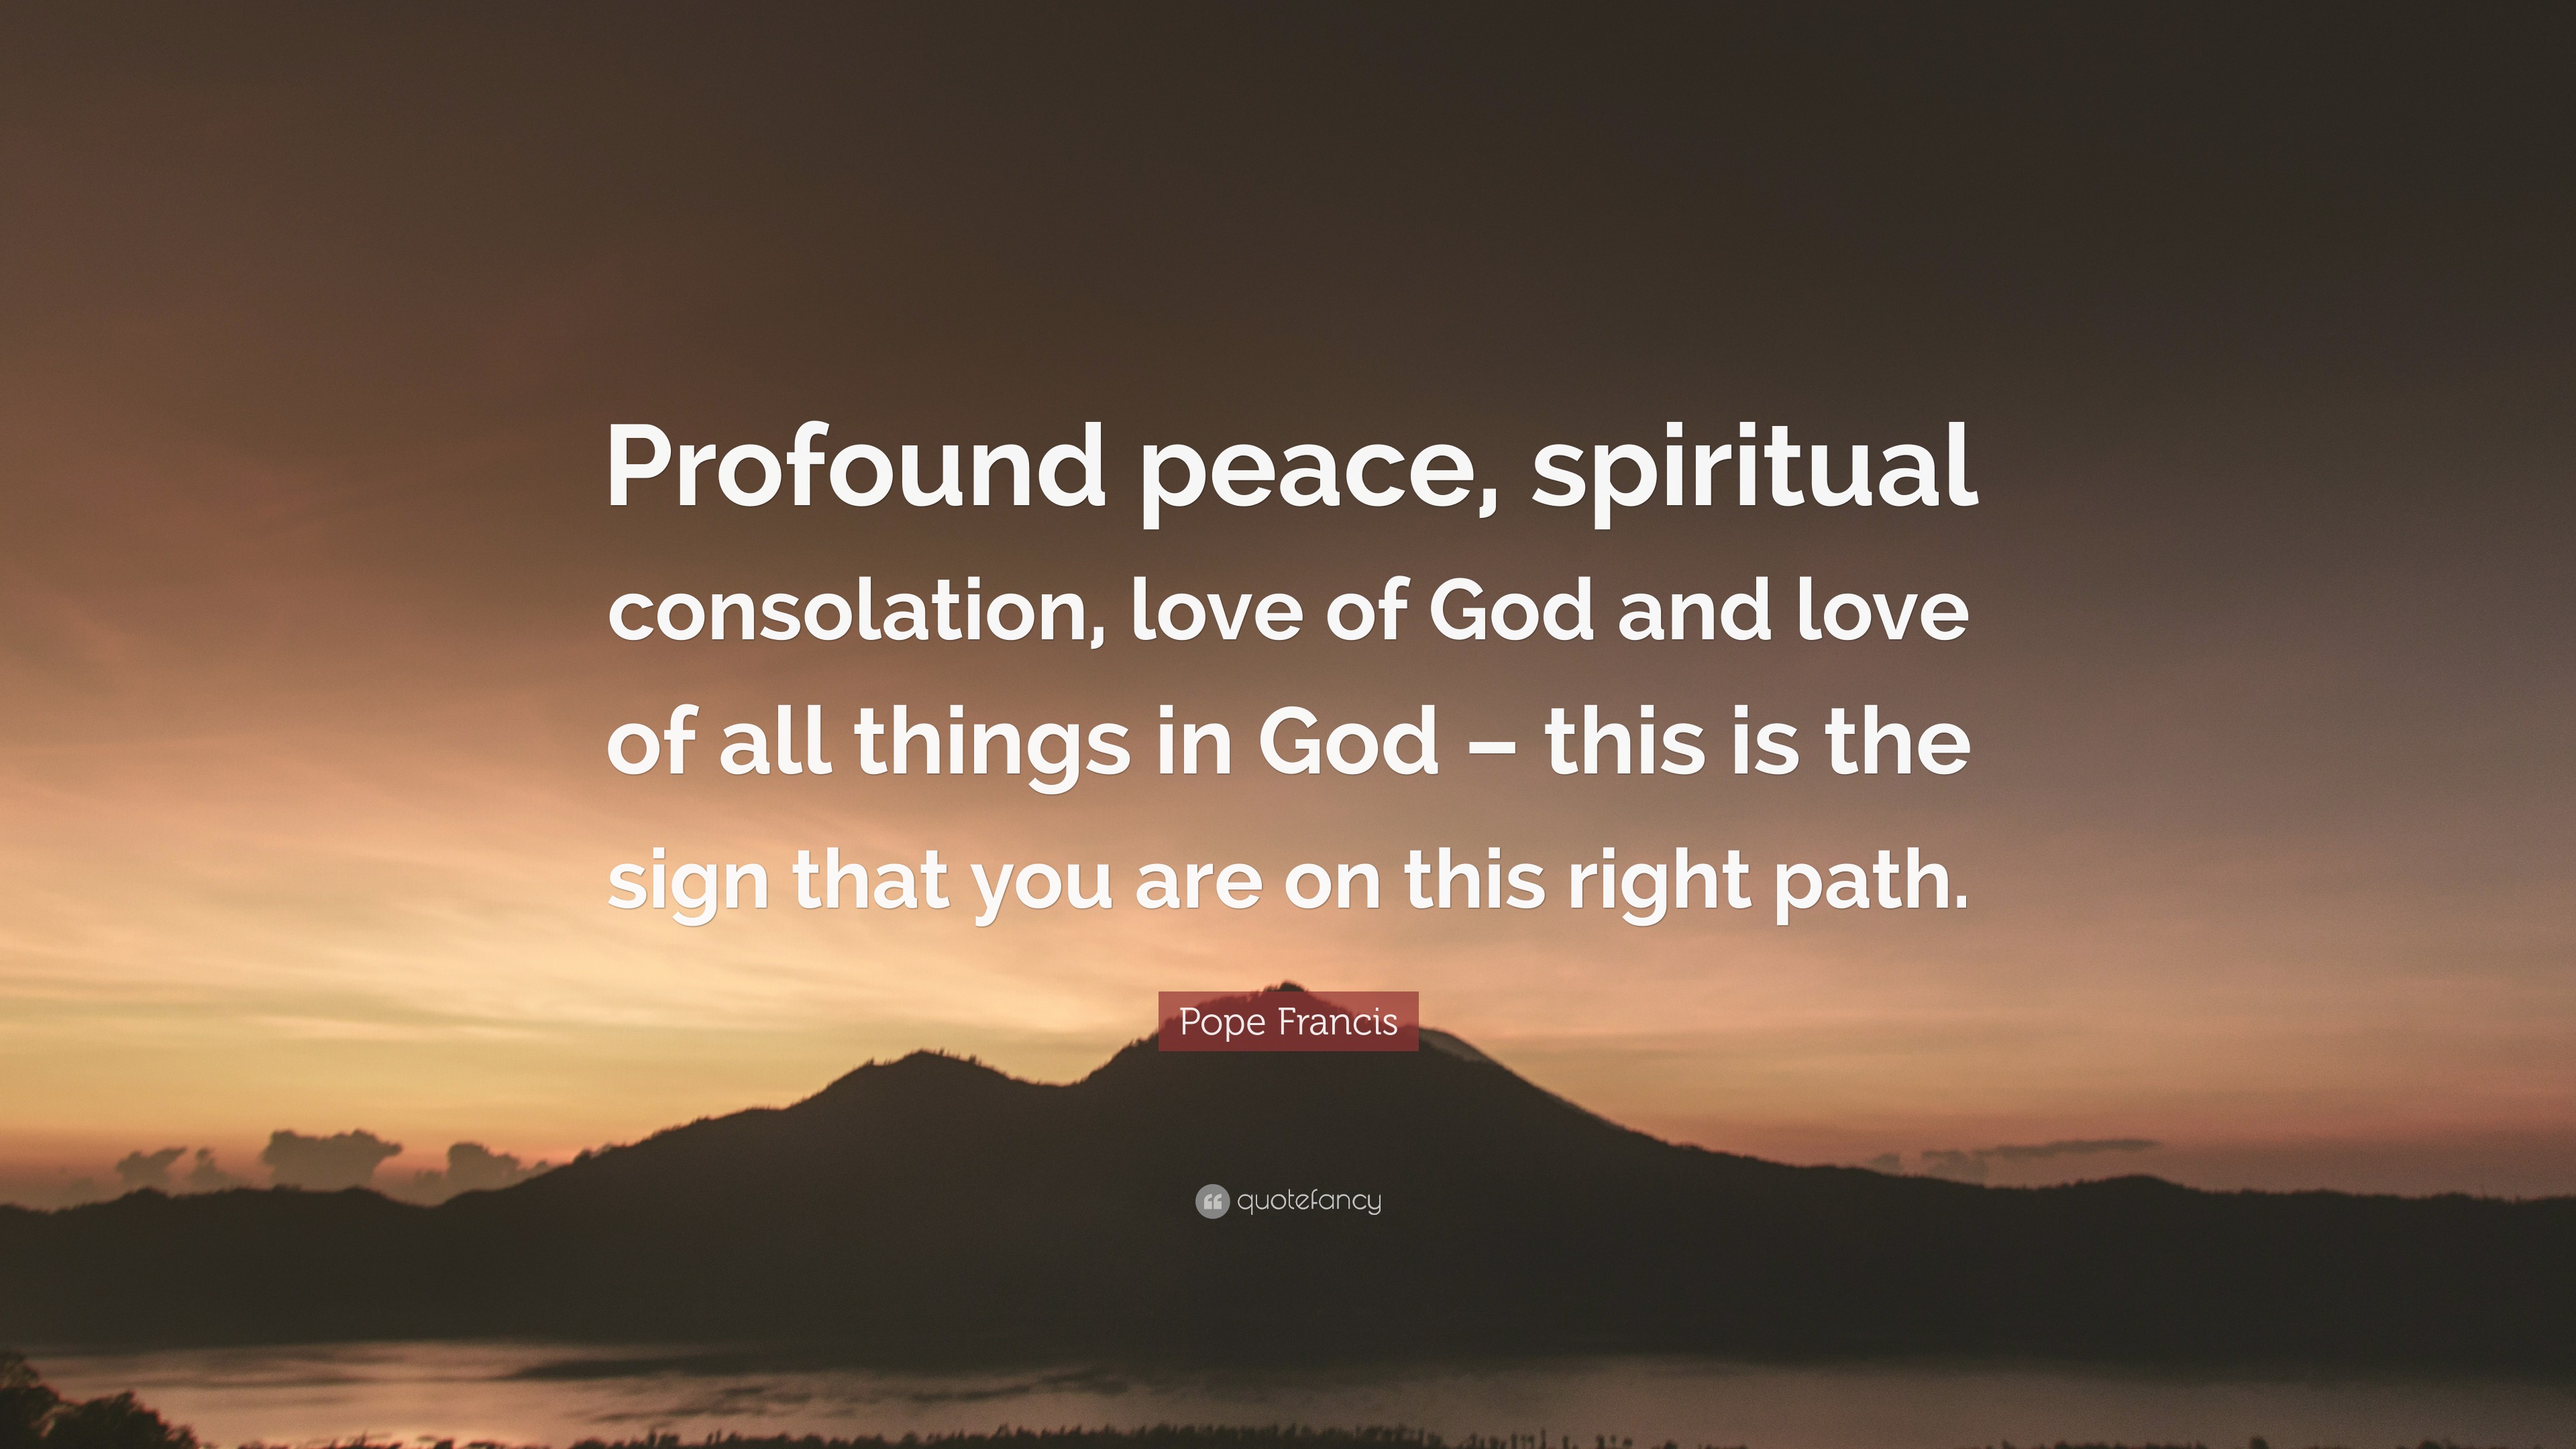 Pope Francis Quote “Profound peace spiritual consolation love of God and love